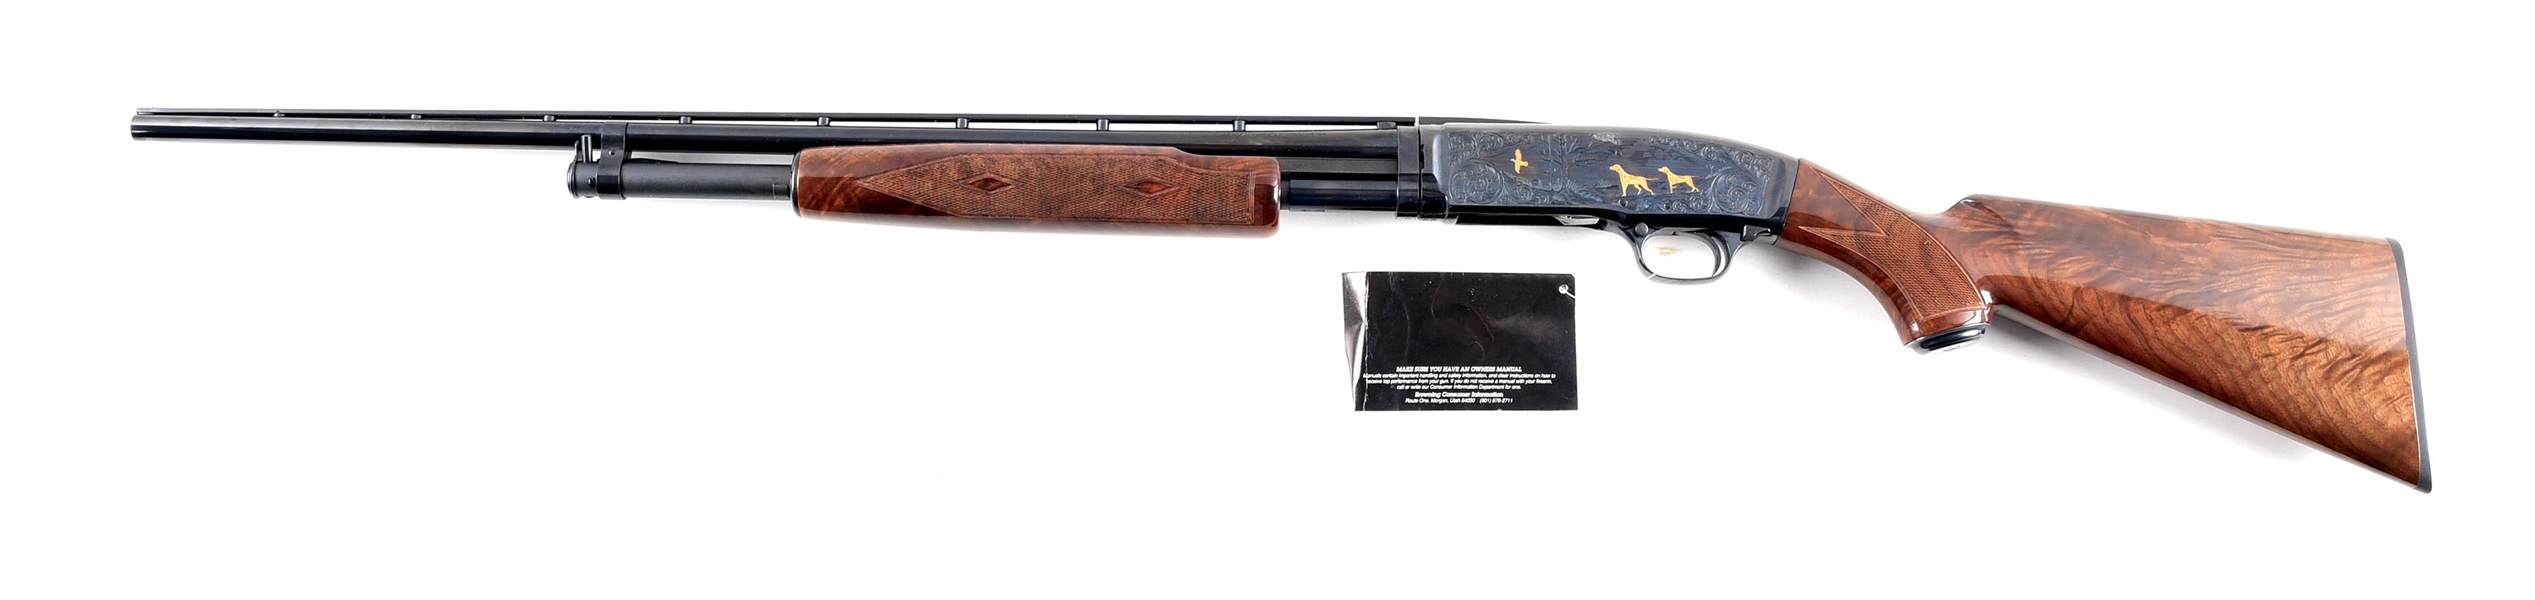 (M) GOLD INLAID & ENGRAVED BROWNING MODEL 42 HIGH GRADE SLIDE ACTION SHOTGUN WITH FACTORY BOX.